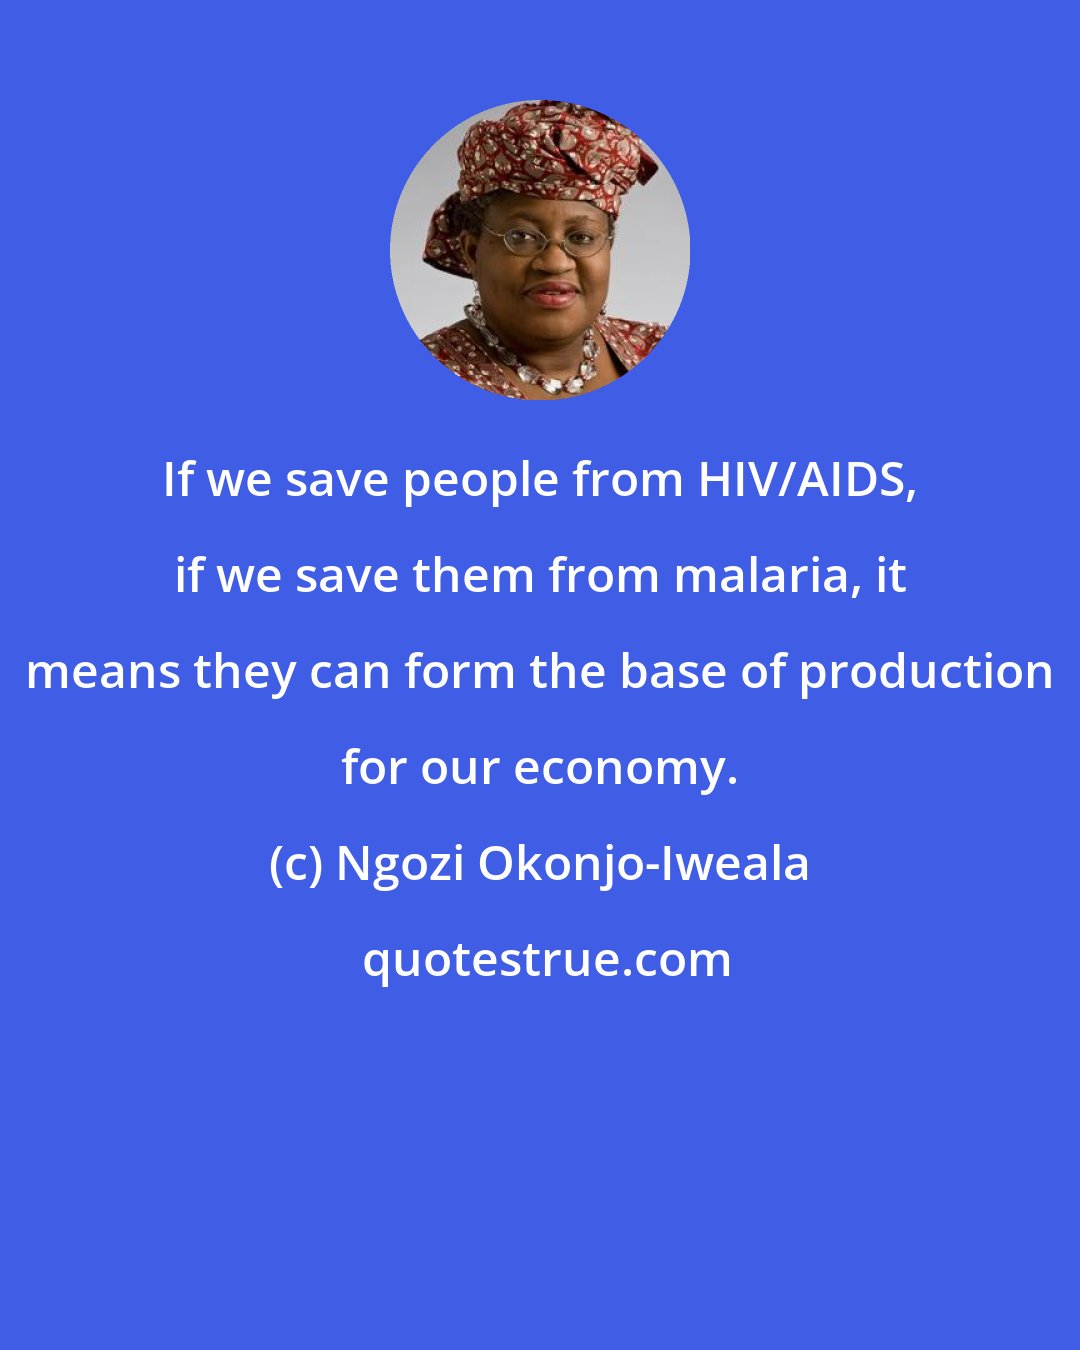 Ngozi Okonjo-Iweala: If we save people from HIV/AIDS, if we save them from malaria, it means they can form the base of production for our economy.